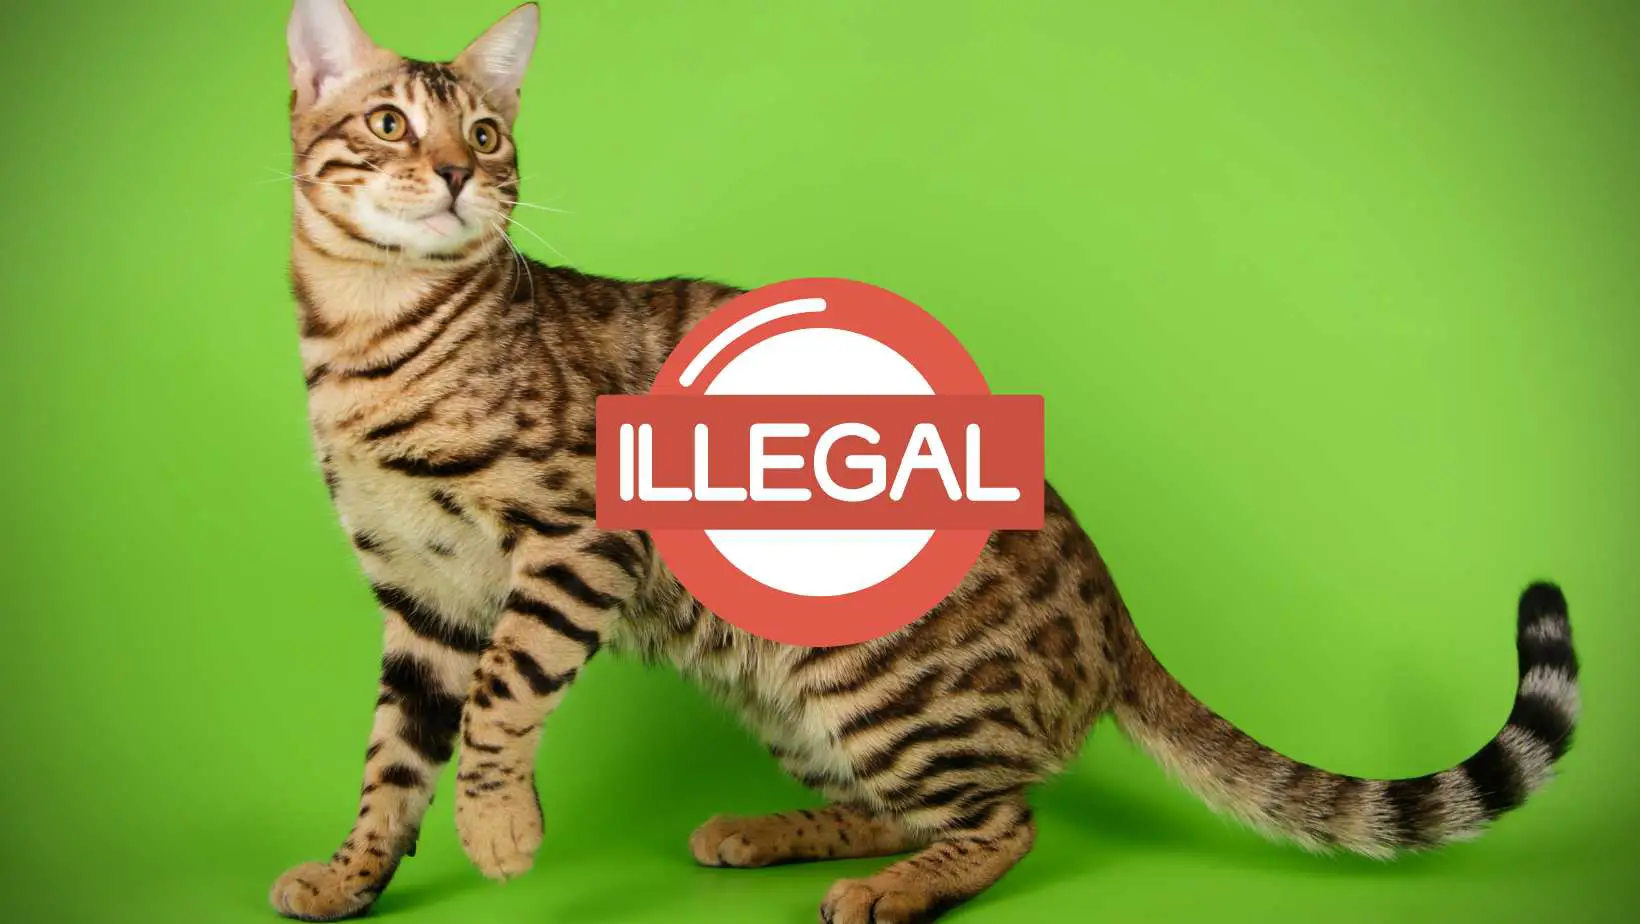 Why Are Bengal Cats Illegal?